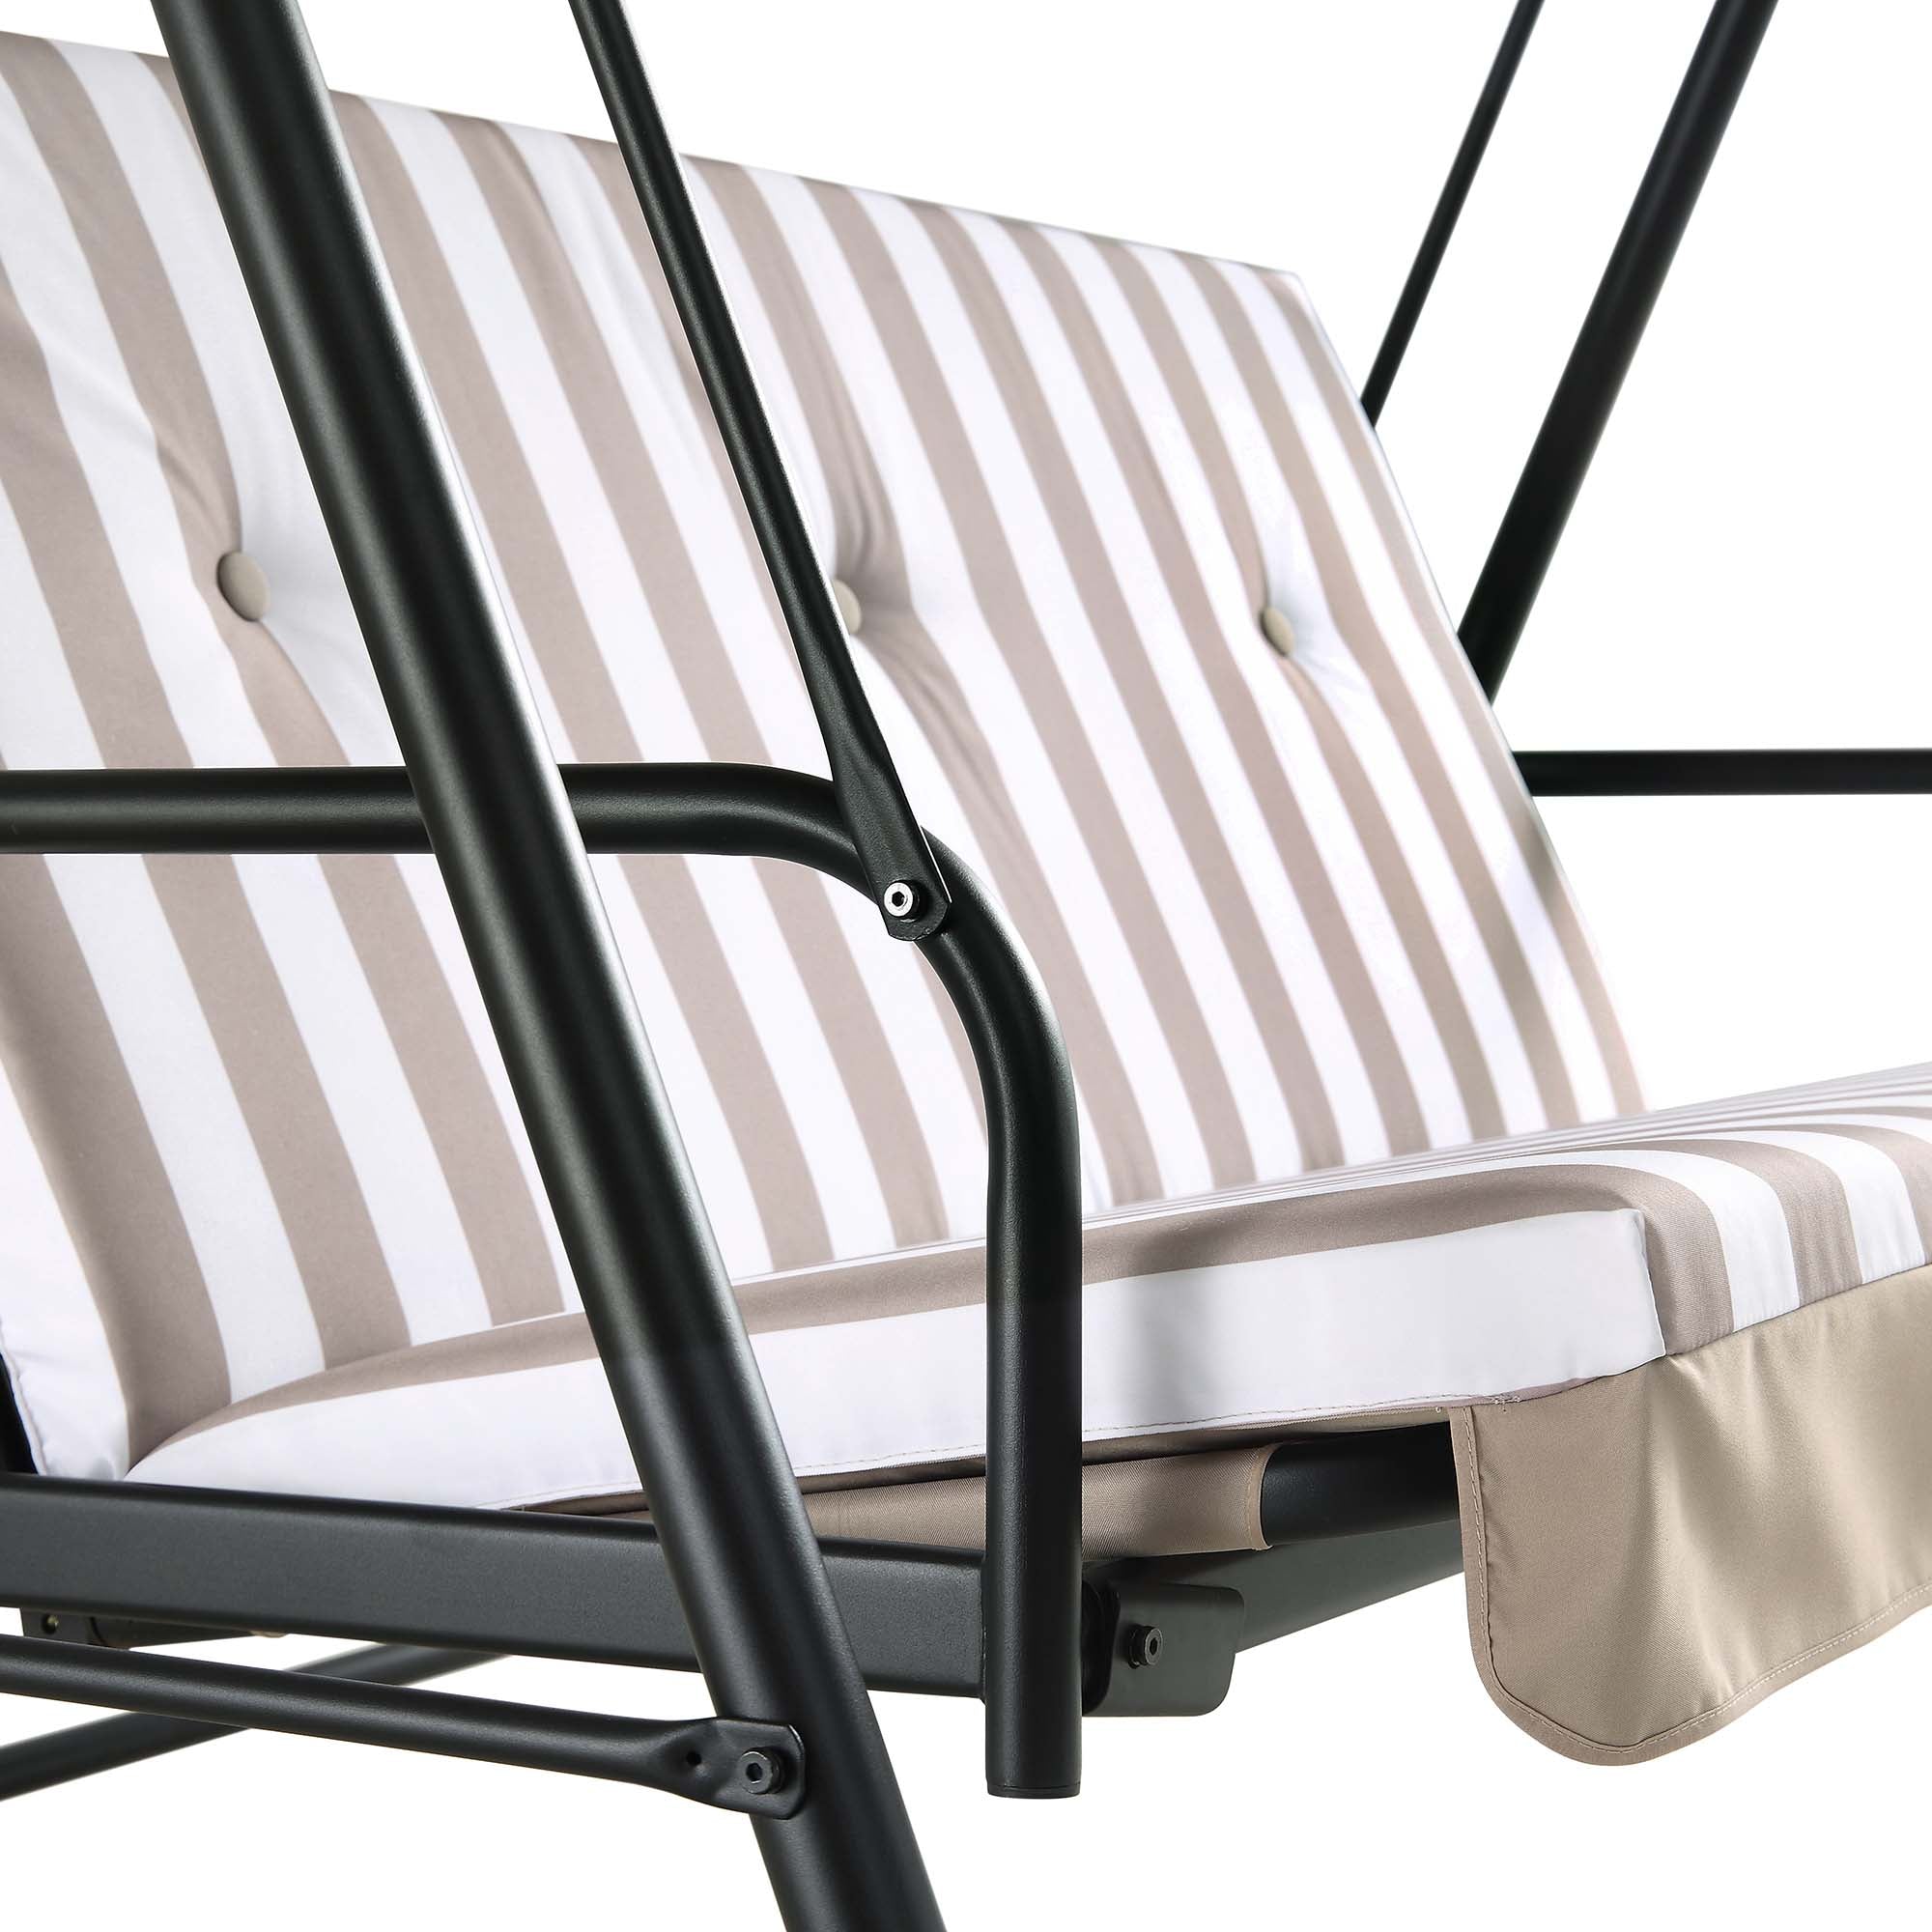 Champneys Outdoor Reclining Swing with Canopy, Taupe Striped